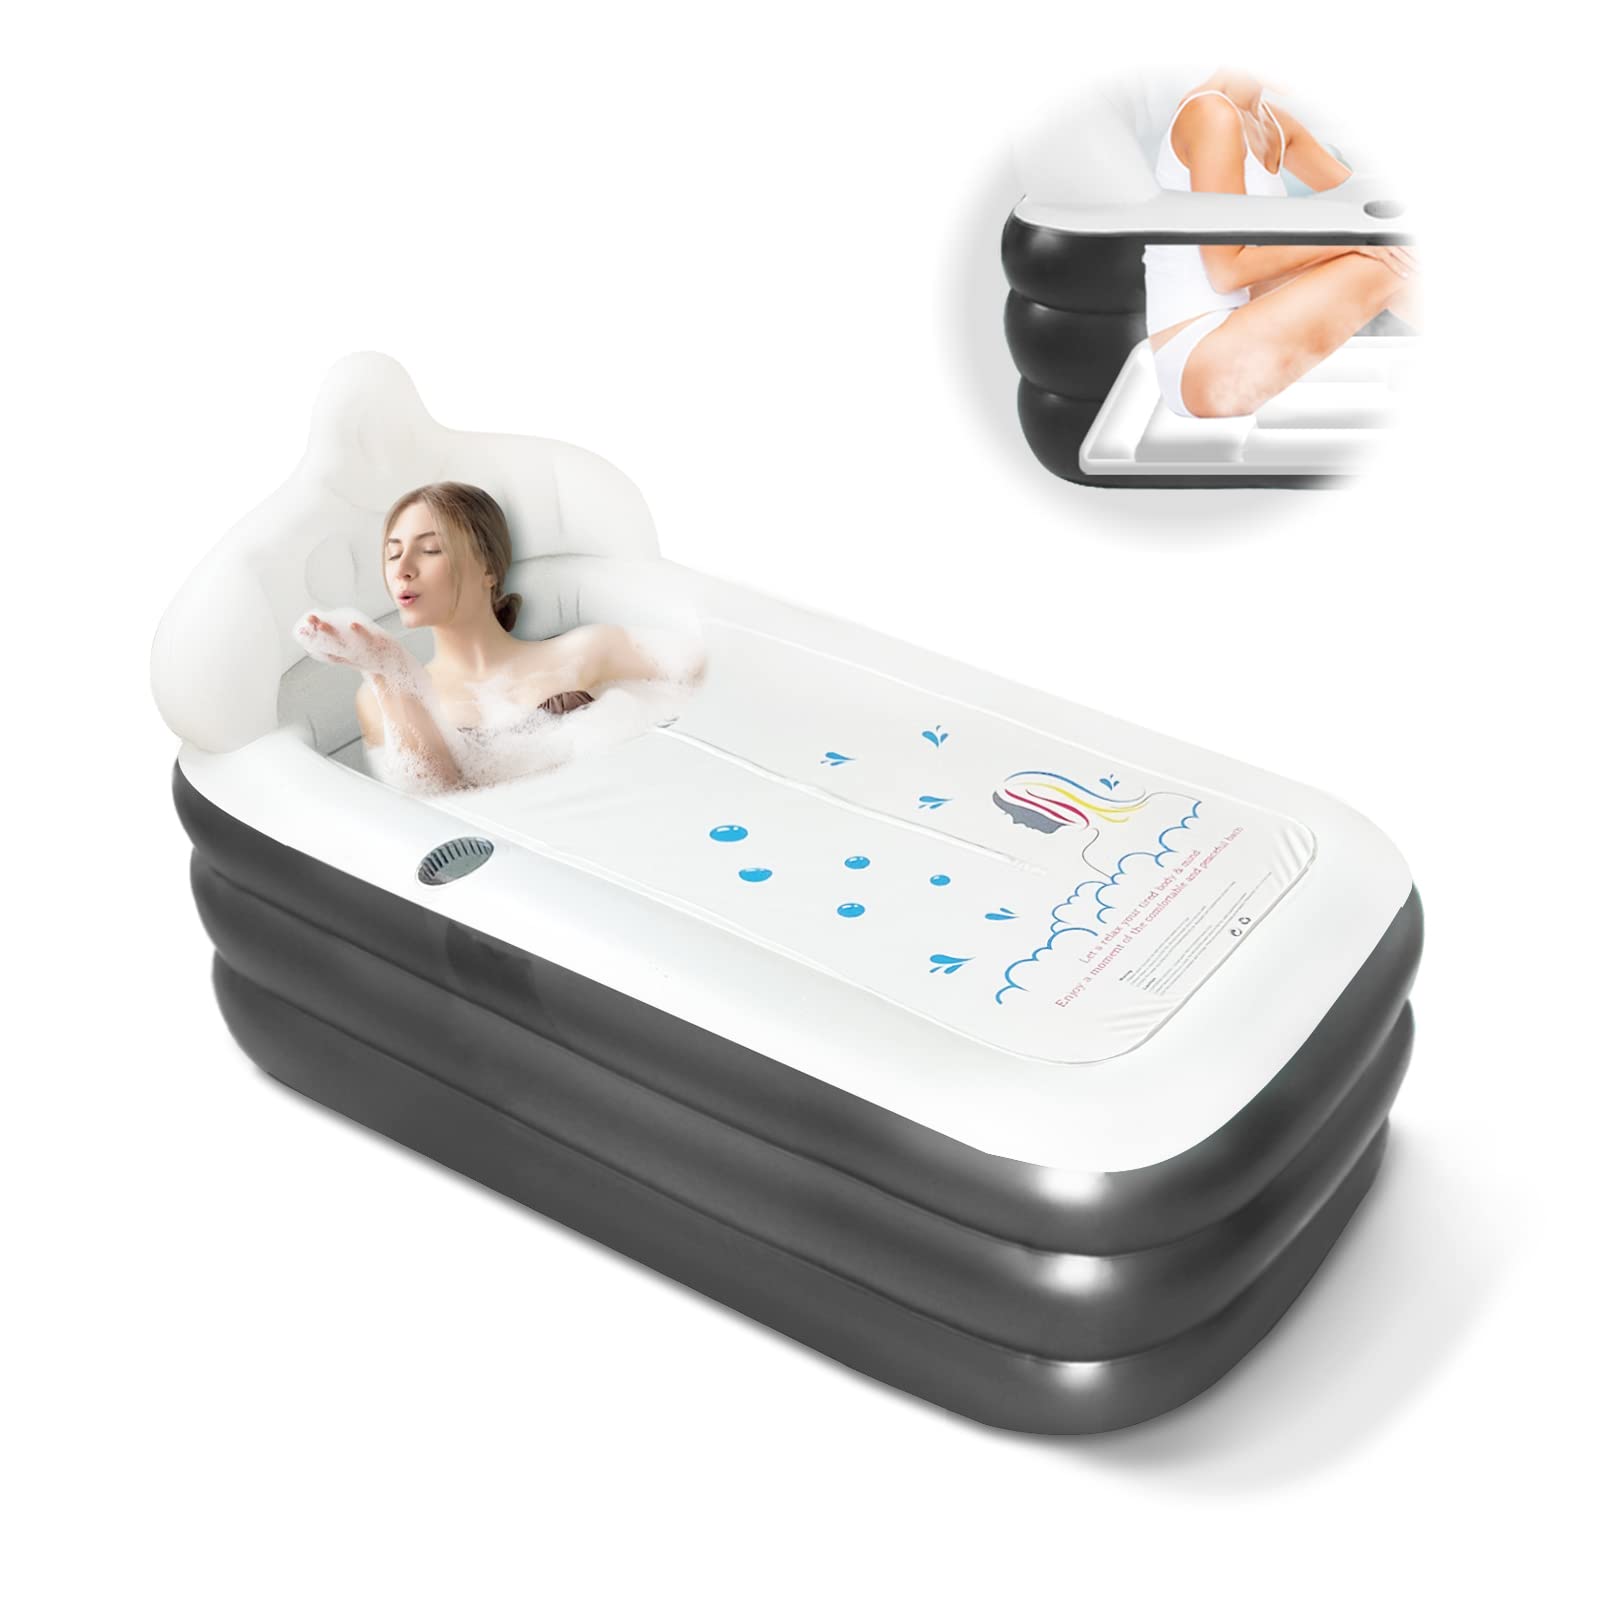 Nevife Inflatable Blow Up Bathtub with Bath Base,Headrest,Cup Holder and Pocket Storage,Foldable/Portable Free Standing Bath Tub for Adult Spa, Ideal for Hot Bath/Ice Bath 63